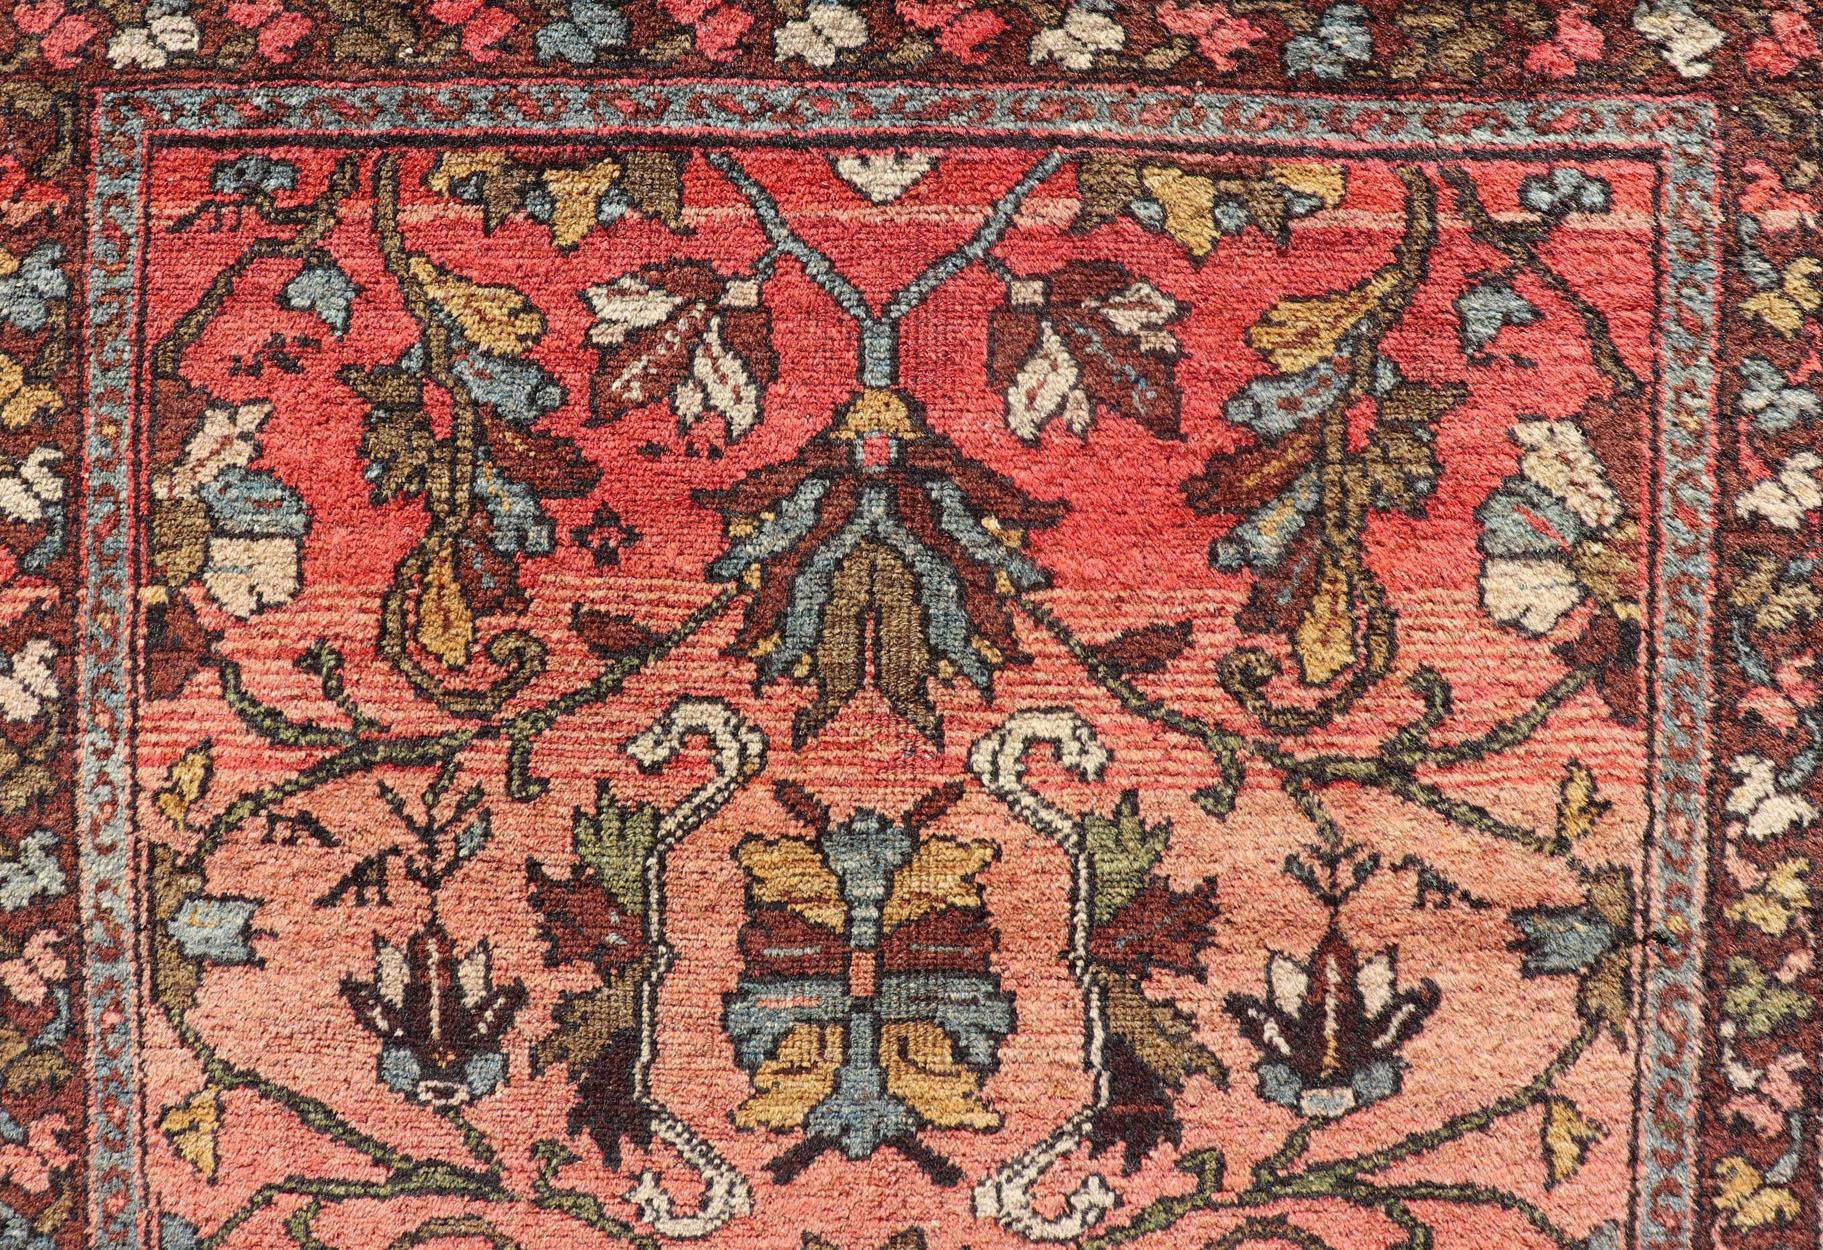 Early 20th Century Antique Persian Hamadan Carpet with Floral Designs in Soft Orange Red and Brown For Sale